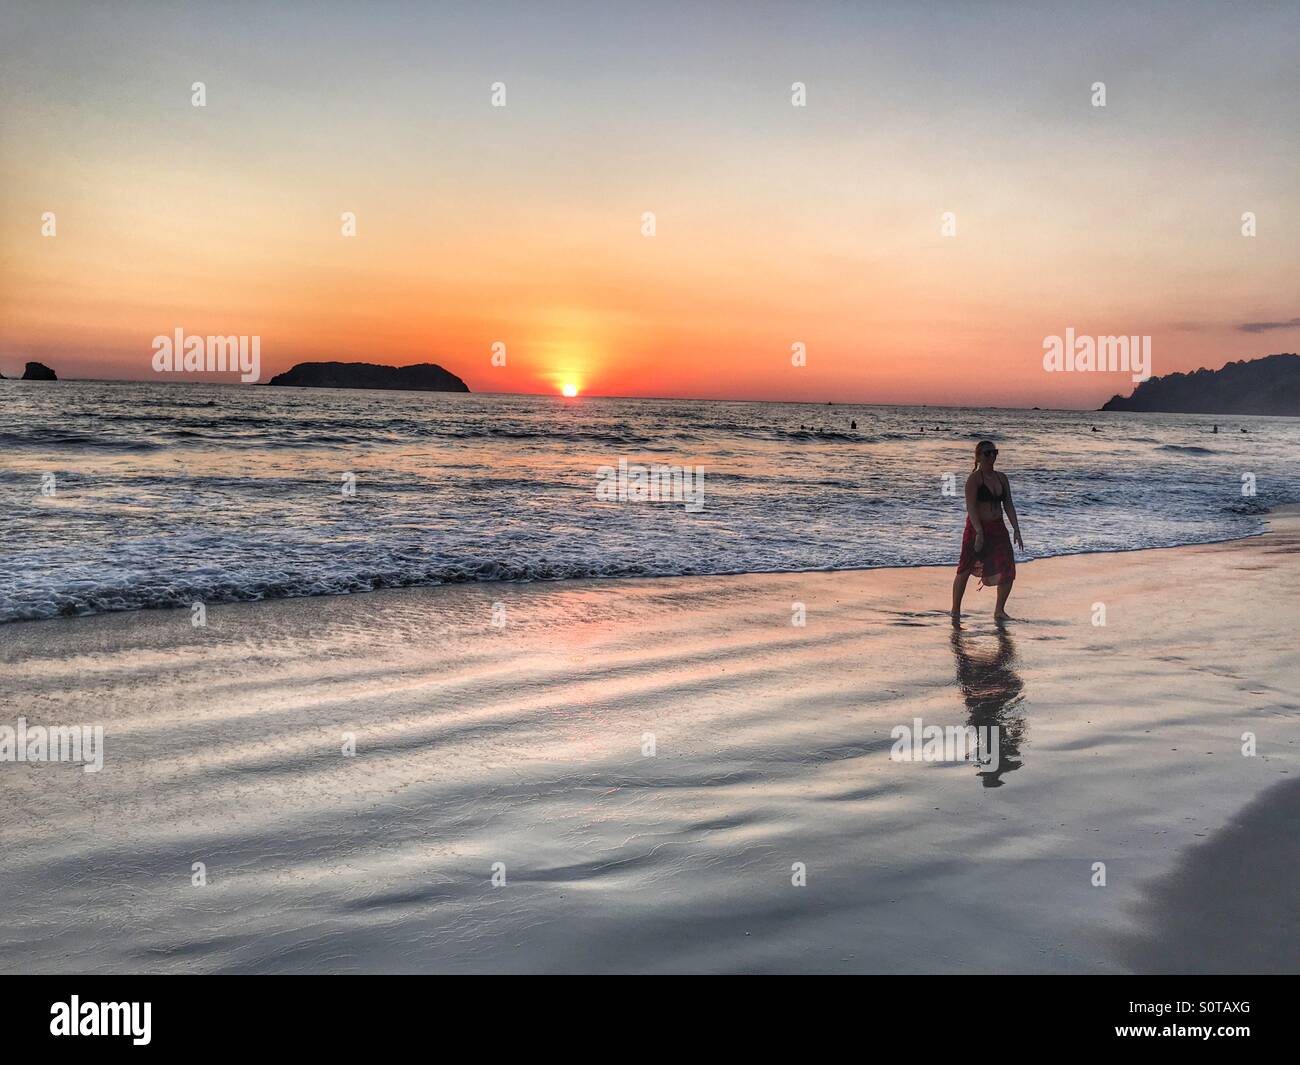 Costa Rican beach at sunset with silhouetted figure Stock Photo